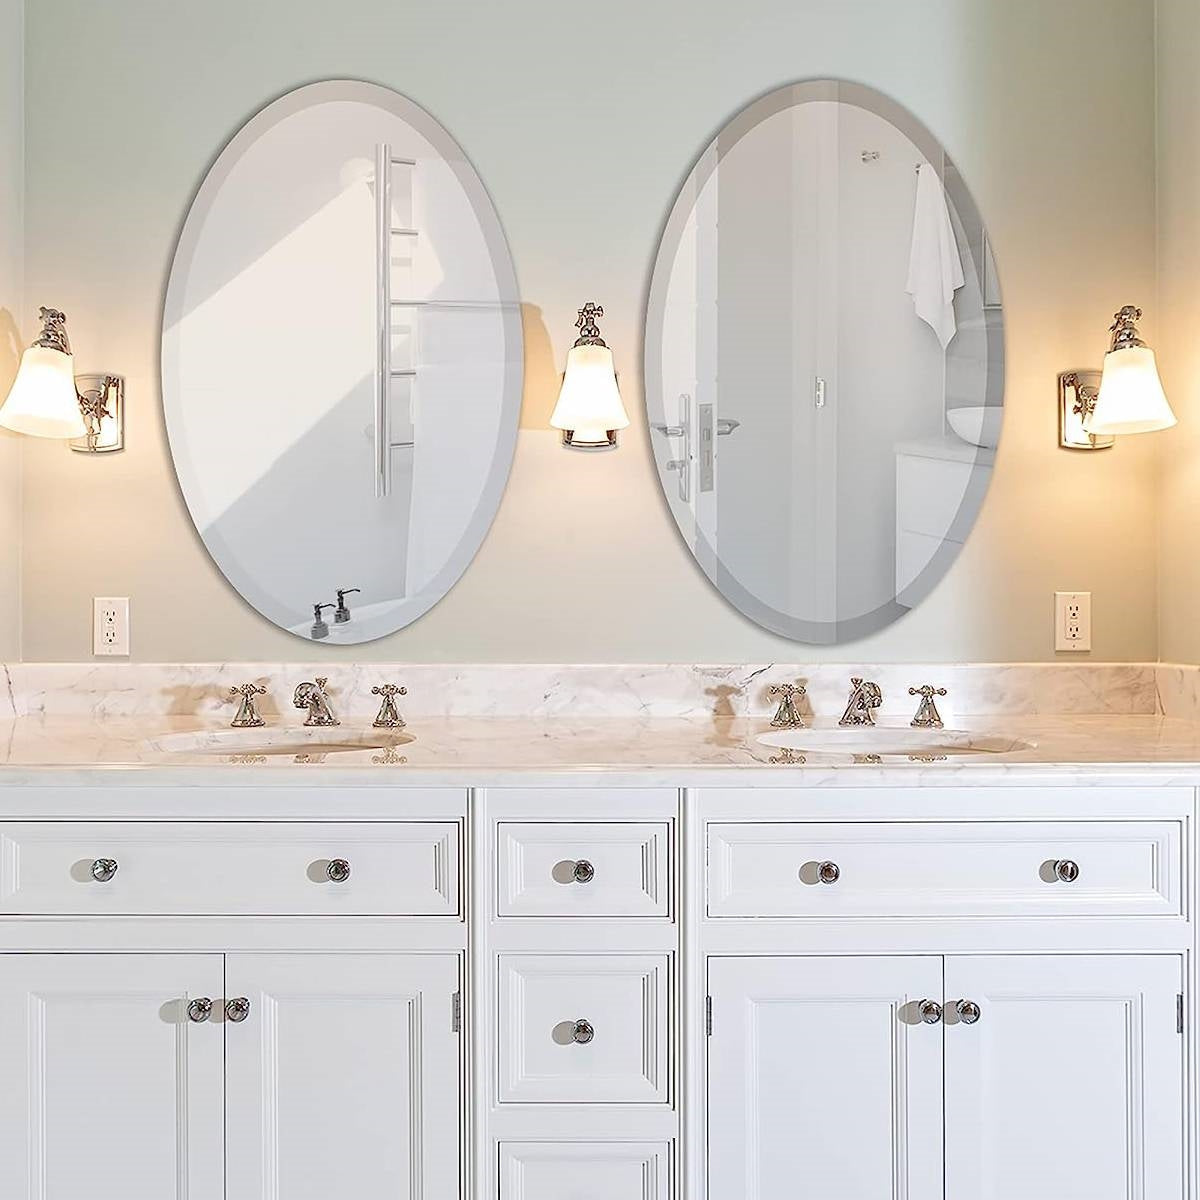 Accents > Mirrors - Oval 36 X 24-inch Beveled Bathroom Living Room Vanity Frameless Wall Mirror